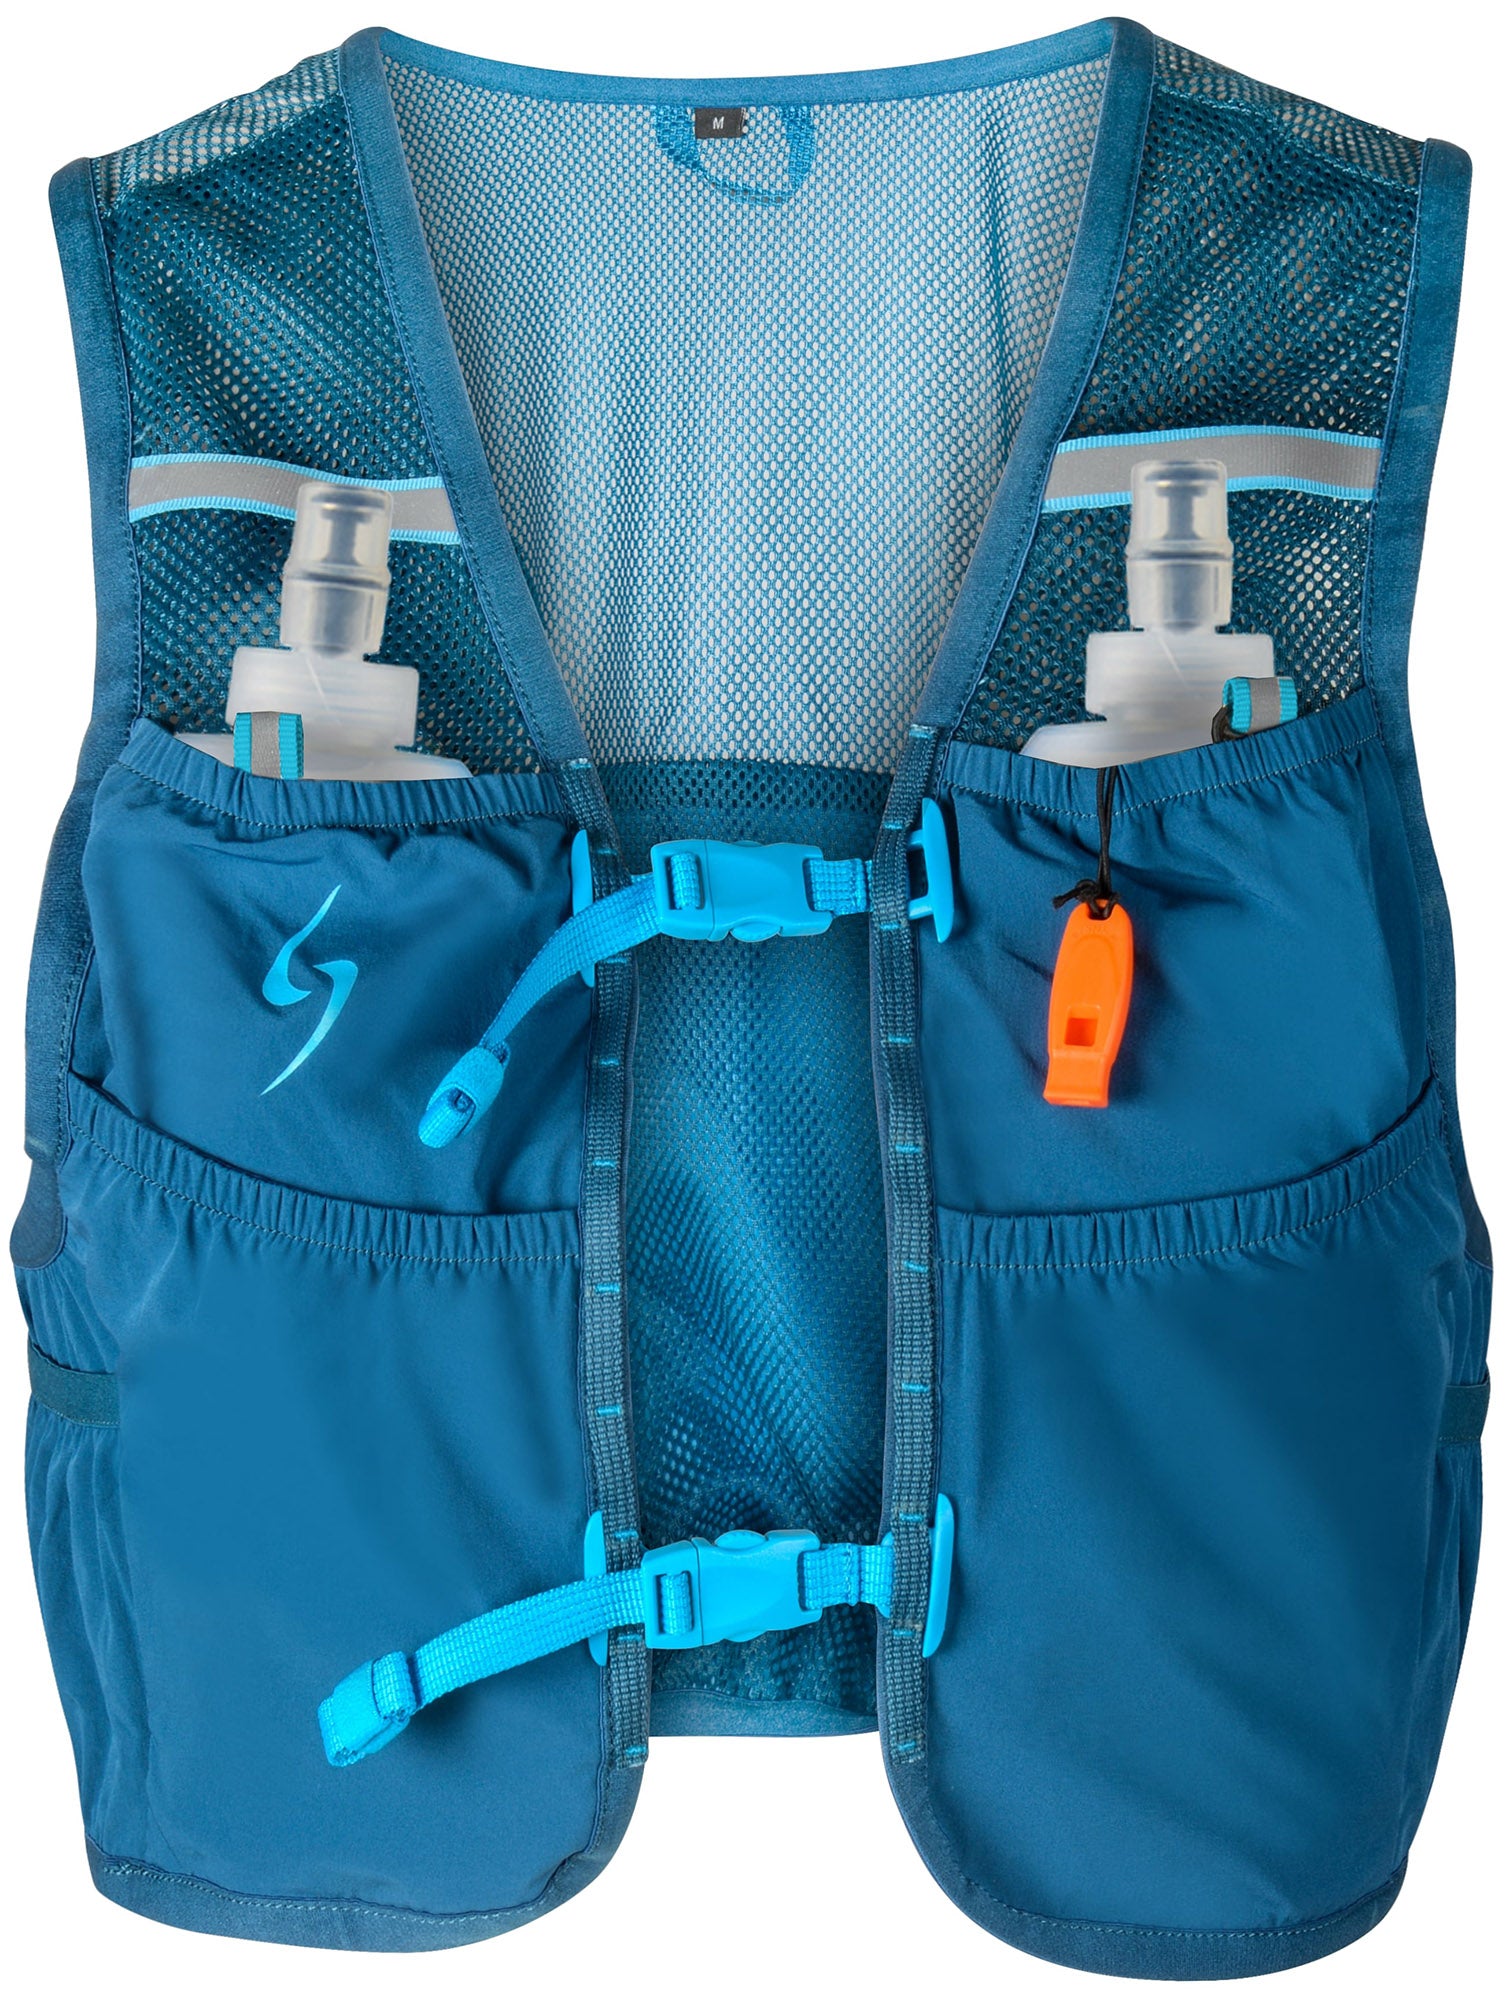 life vest - Camping & Hiking Best Prices and Online Promos